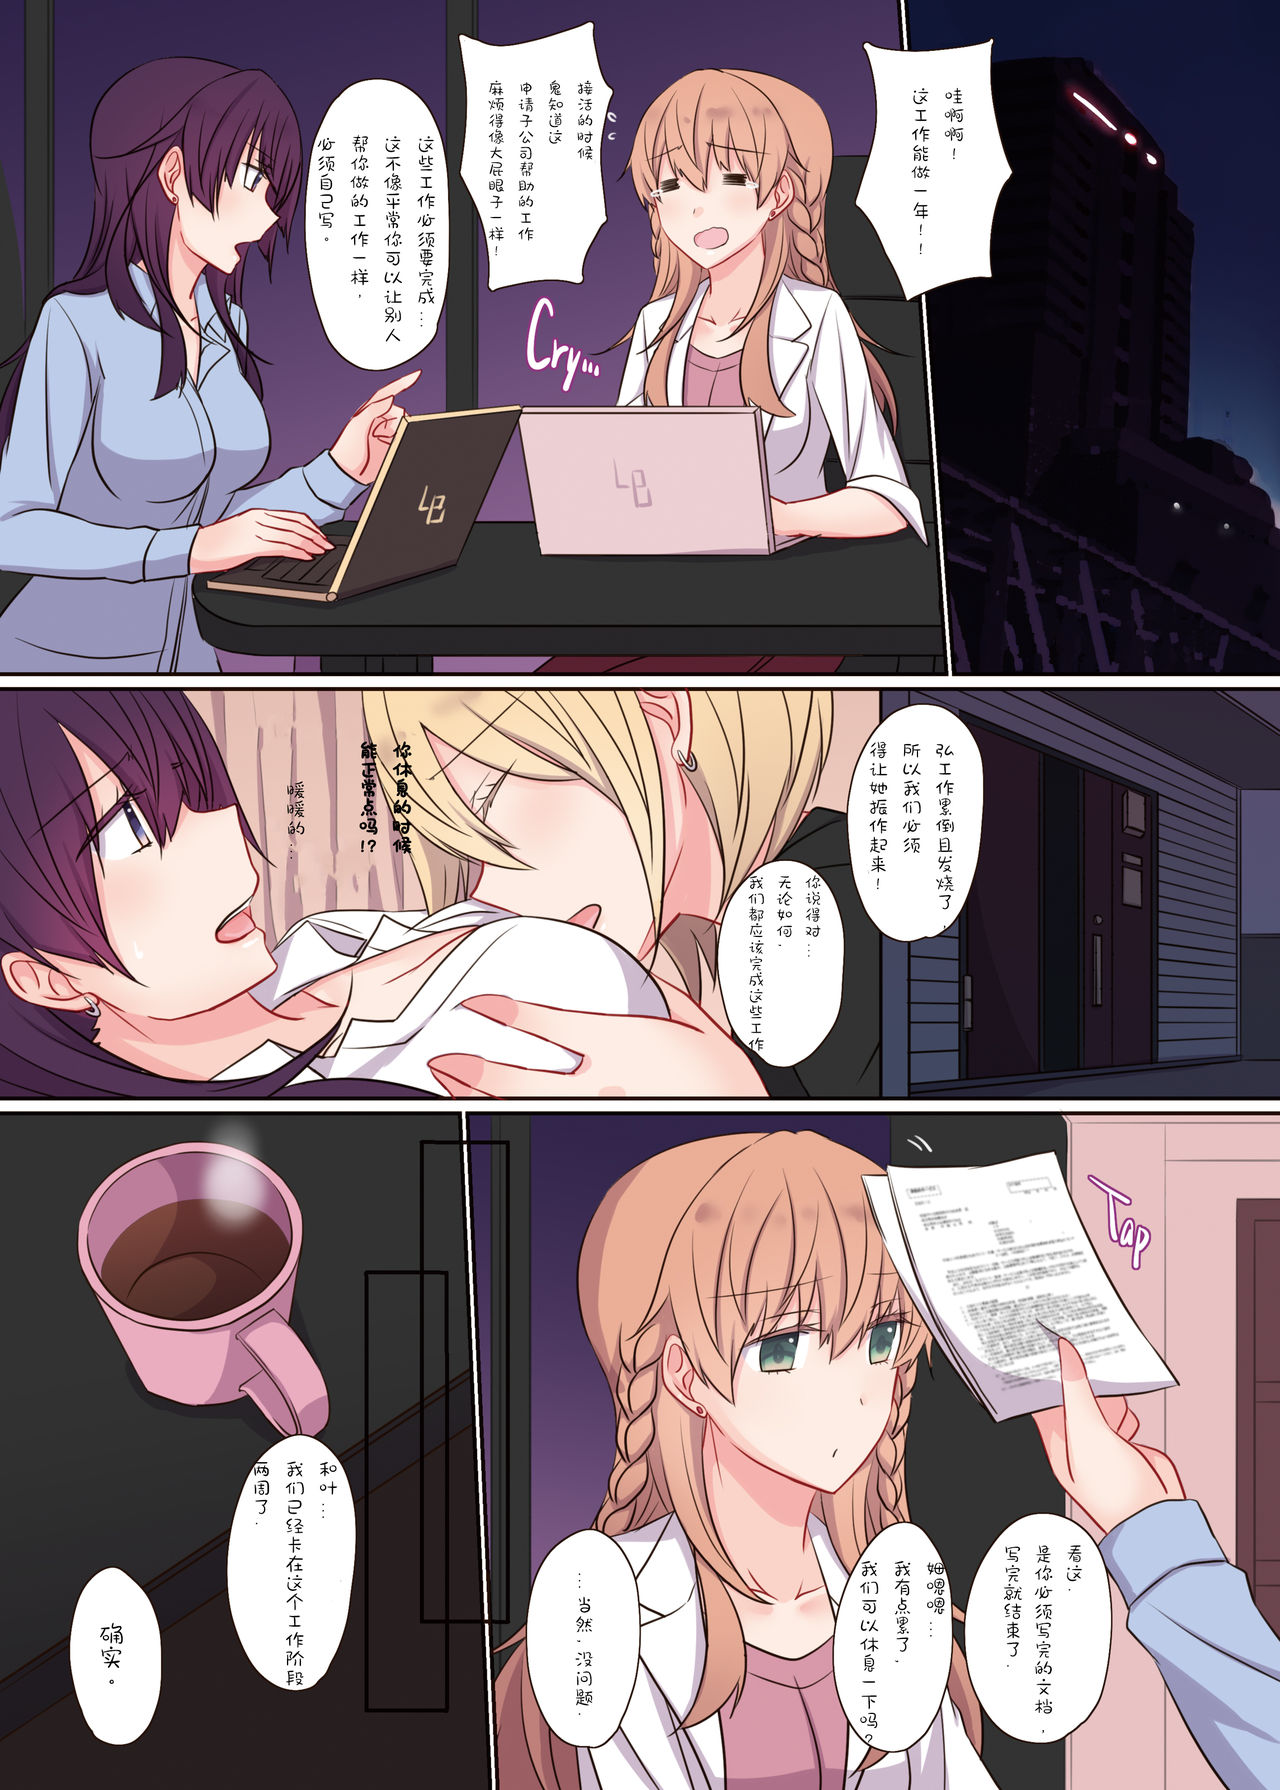 [434 Not Found (isya)] Office Sweet 365 -APPEND- [Chinese] [WTM直接汉化&v.v.t.m汉化组] [Digital] page 3 full